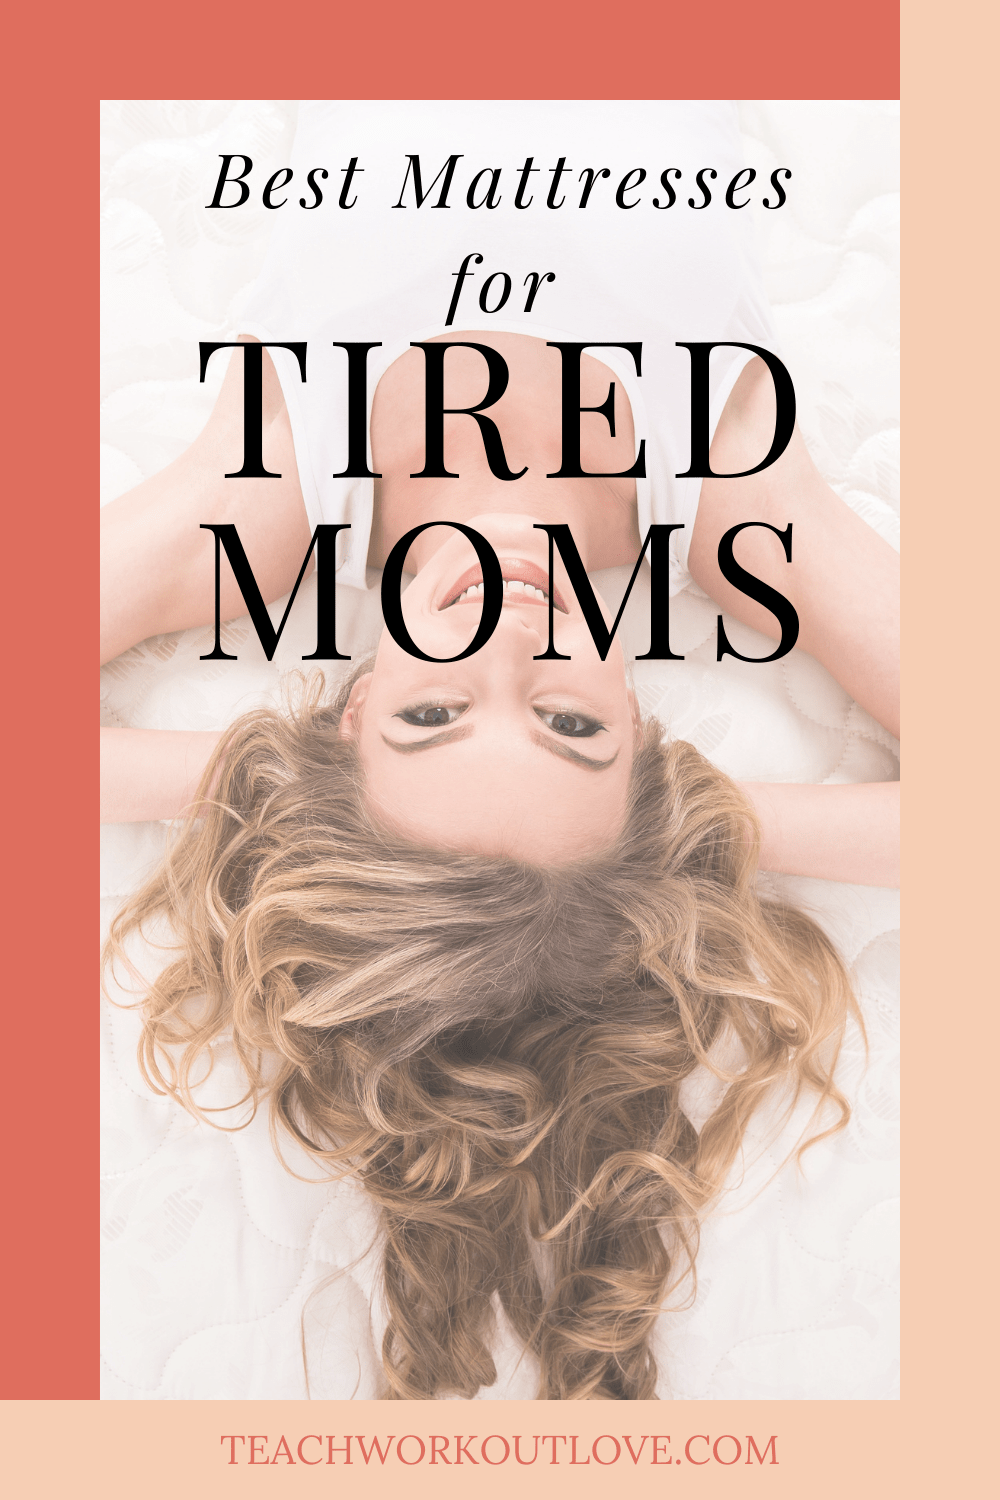 Getting proper sleep at night is important as a mom. We are always tired and sleep is a necessity. Here's the best mattresses for tired moms. 